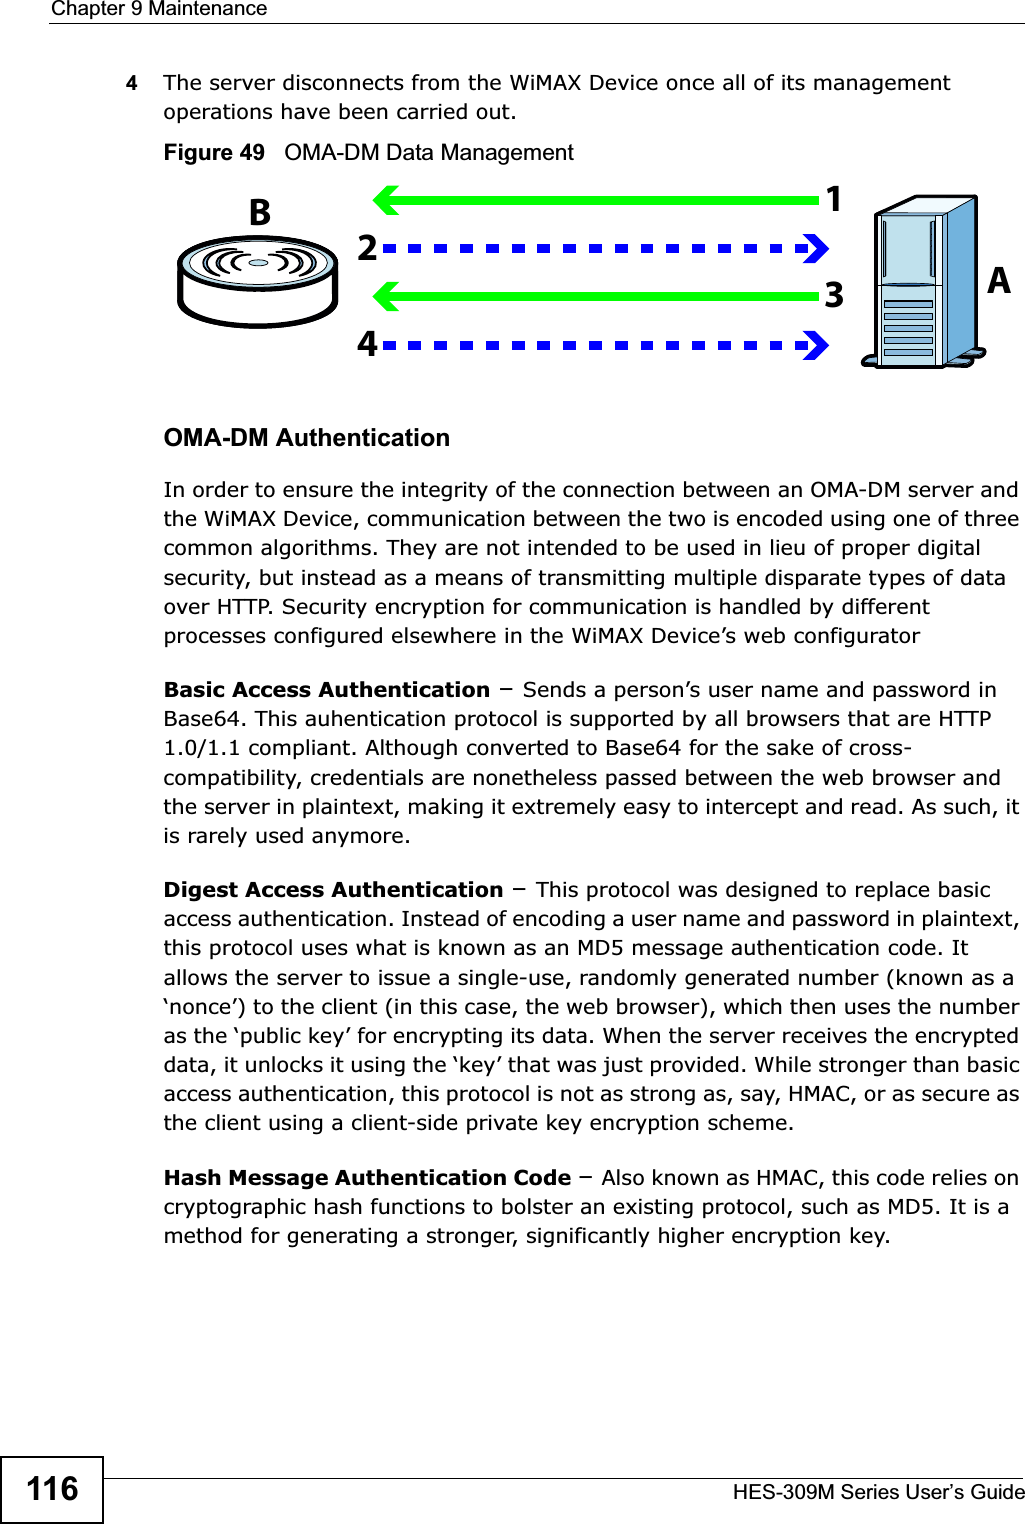 Chapter 9 MaintenanceHES-309M Series User’s Guide1164The server disconnects from the WiMAX Device once all of its management operations have been carried out.Figure 49   OMA-DM Data ManagementOMA-DM AuthenticationIn order to ensure the integrity of the connection between an OMA-DM server and the WiMAX Device, communication between the two is encoded using one of three common algorithms. They are not intended to be used in lieu of proper digital security, but instead as a means of transmitting multiple disparate types of data over HTTP. Security encryption for communication is handled by different processes configured elsewhere in the WiMAX Device’s web configuratorBasic Access Authentication –Sends a person’s user name and password in Base64. This auhentication protocol is supported by all browsers that are HTTP 1.0/1.1 compliant. Although converted to Base64 for the sake of cross-compatibility, credentials are nonetheless passed between the web browser and the server in plaintext, making it extremely easy to intercept and read. As such, it is rarely used anymore.Digest Access Authentication –This protocol was designed to replace basic access authentication. Instead of encoding a user name and password in plaintext, this protocol uses what is known as an MD5 message authentication code. It allows the server to issue a single-use, randomly generated number (known as a ‘nonce’) to the client (in this case, the web browser), which then uses the number as the ‘public key’ for encrypting its data. When the server receives the encrypted data, it unlocks it using the ‘key’ that was just provided. While stronger than basic access authentication, this protocol is not as strong as, say, HMAC, or as secure as the client using a client-side private key encryption scheme. Hash Message Authentication Code –Also known as HMAC, this code relies on cryptographic hash functions to bolster an existing protocol, such as MD5. It is a method for generating a stronger, significantly higher encryption key.AB1234